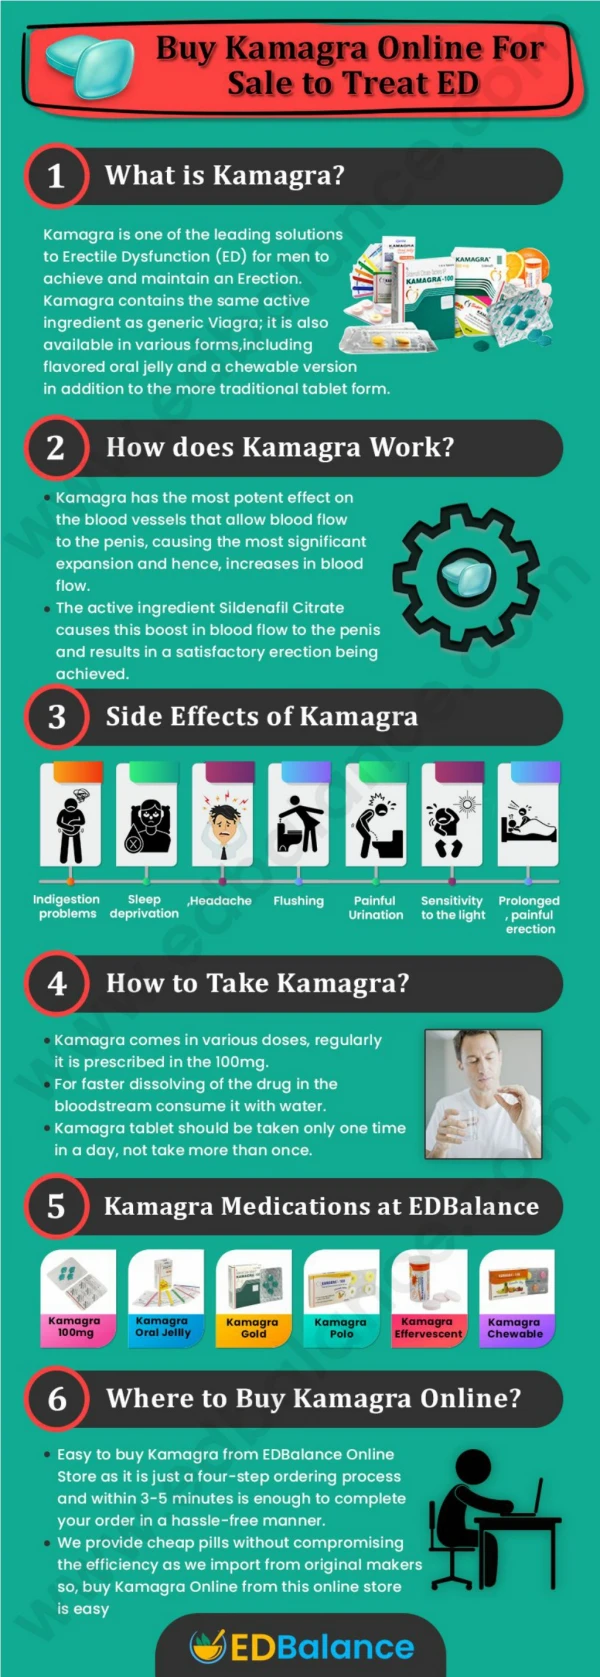 Buy Kamagra Online For Sale To Treat ED